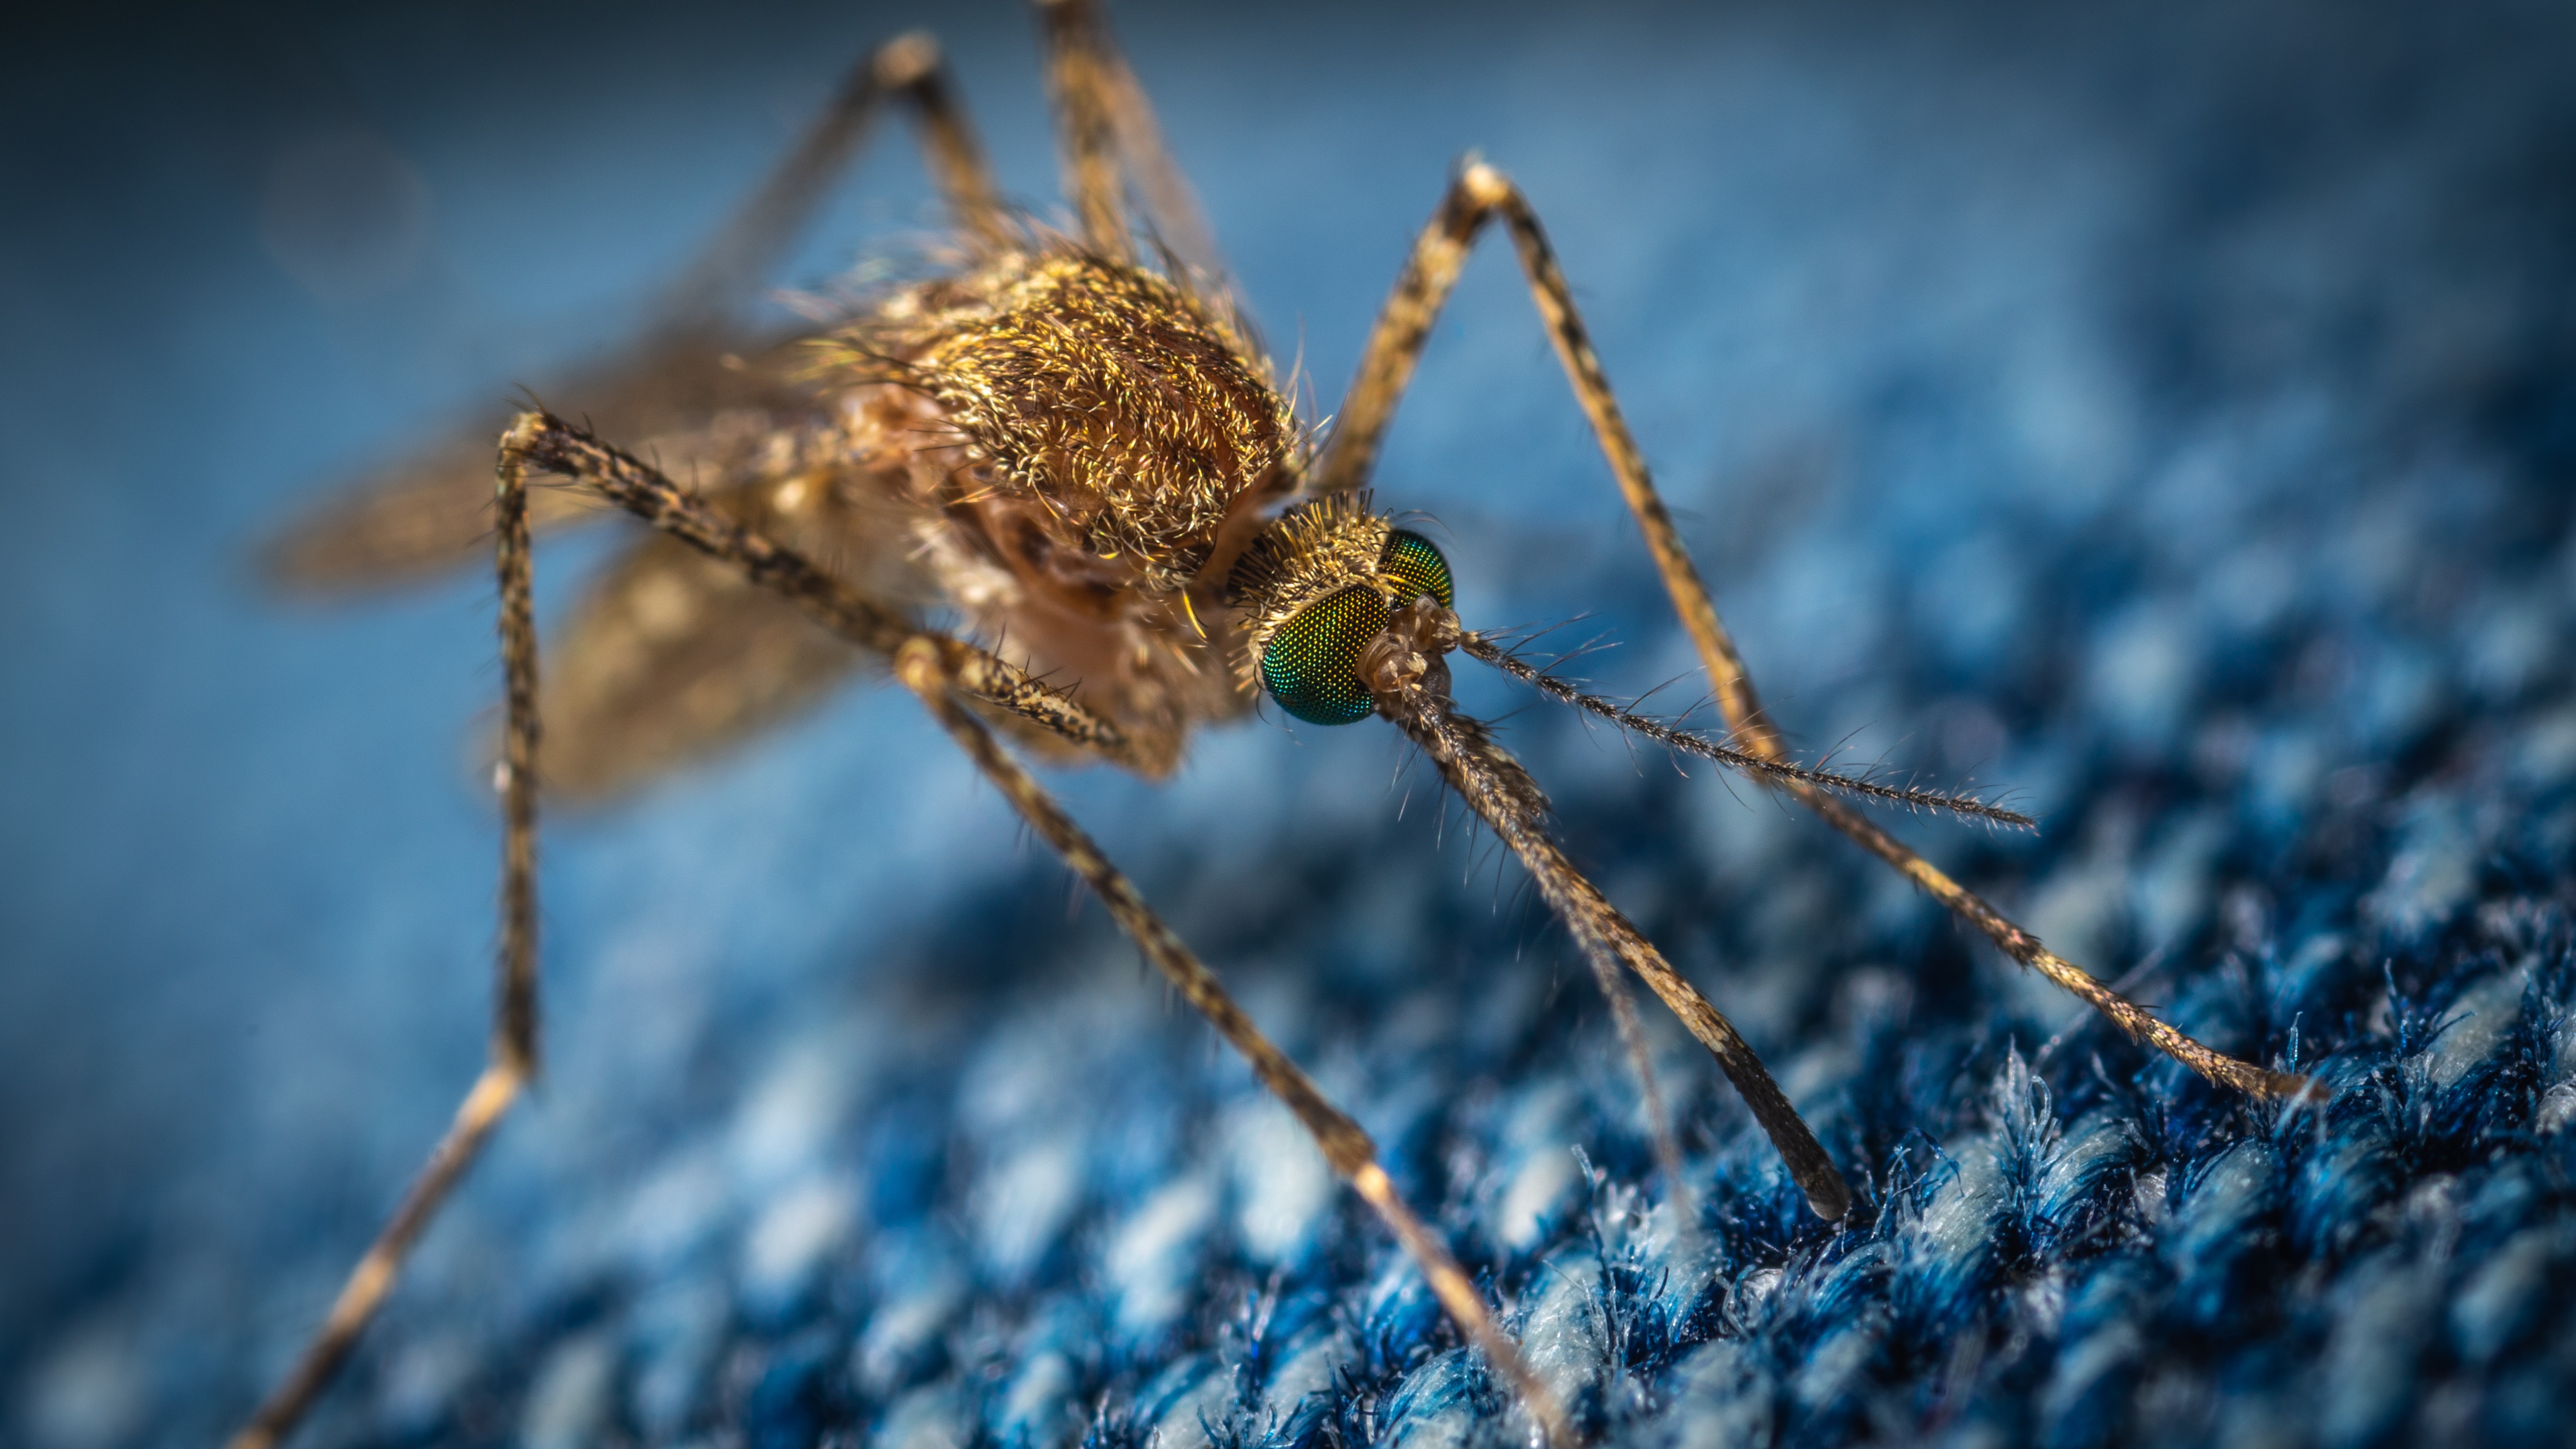 Suspected outbreak of Ross River Fever and Barmah Forest Virus in southern NSW